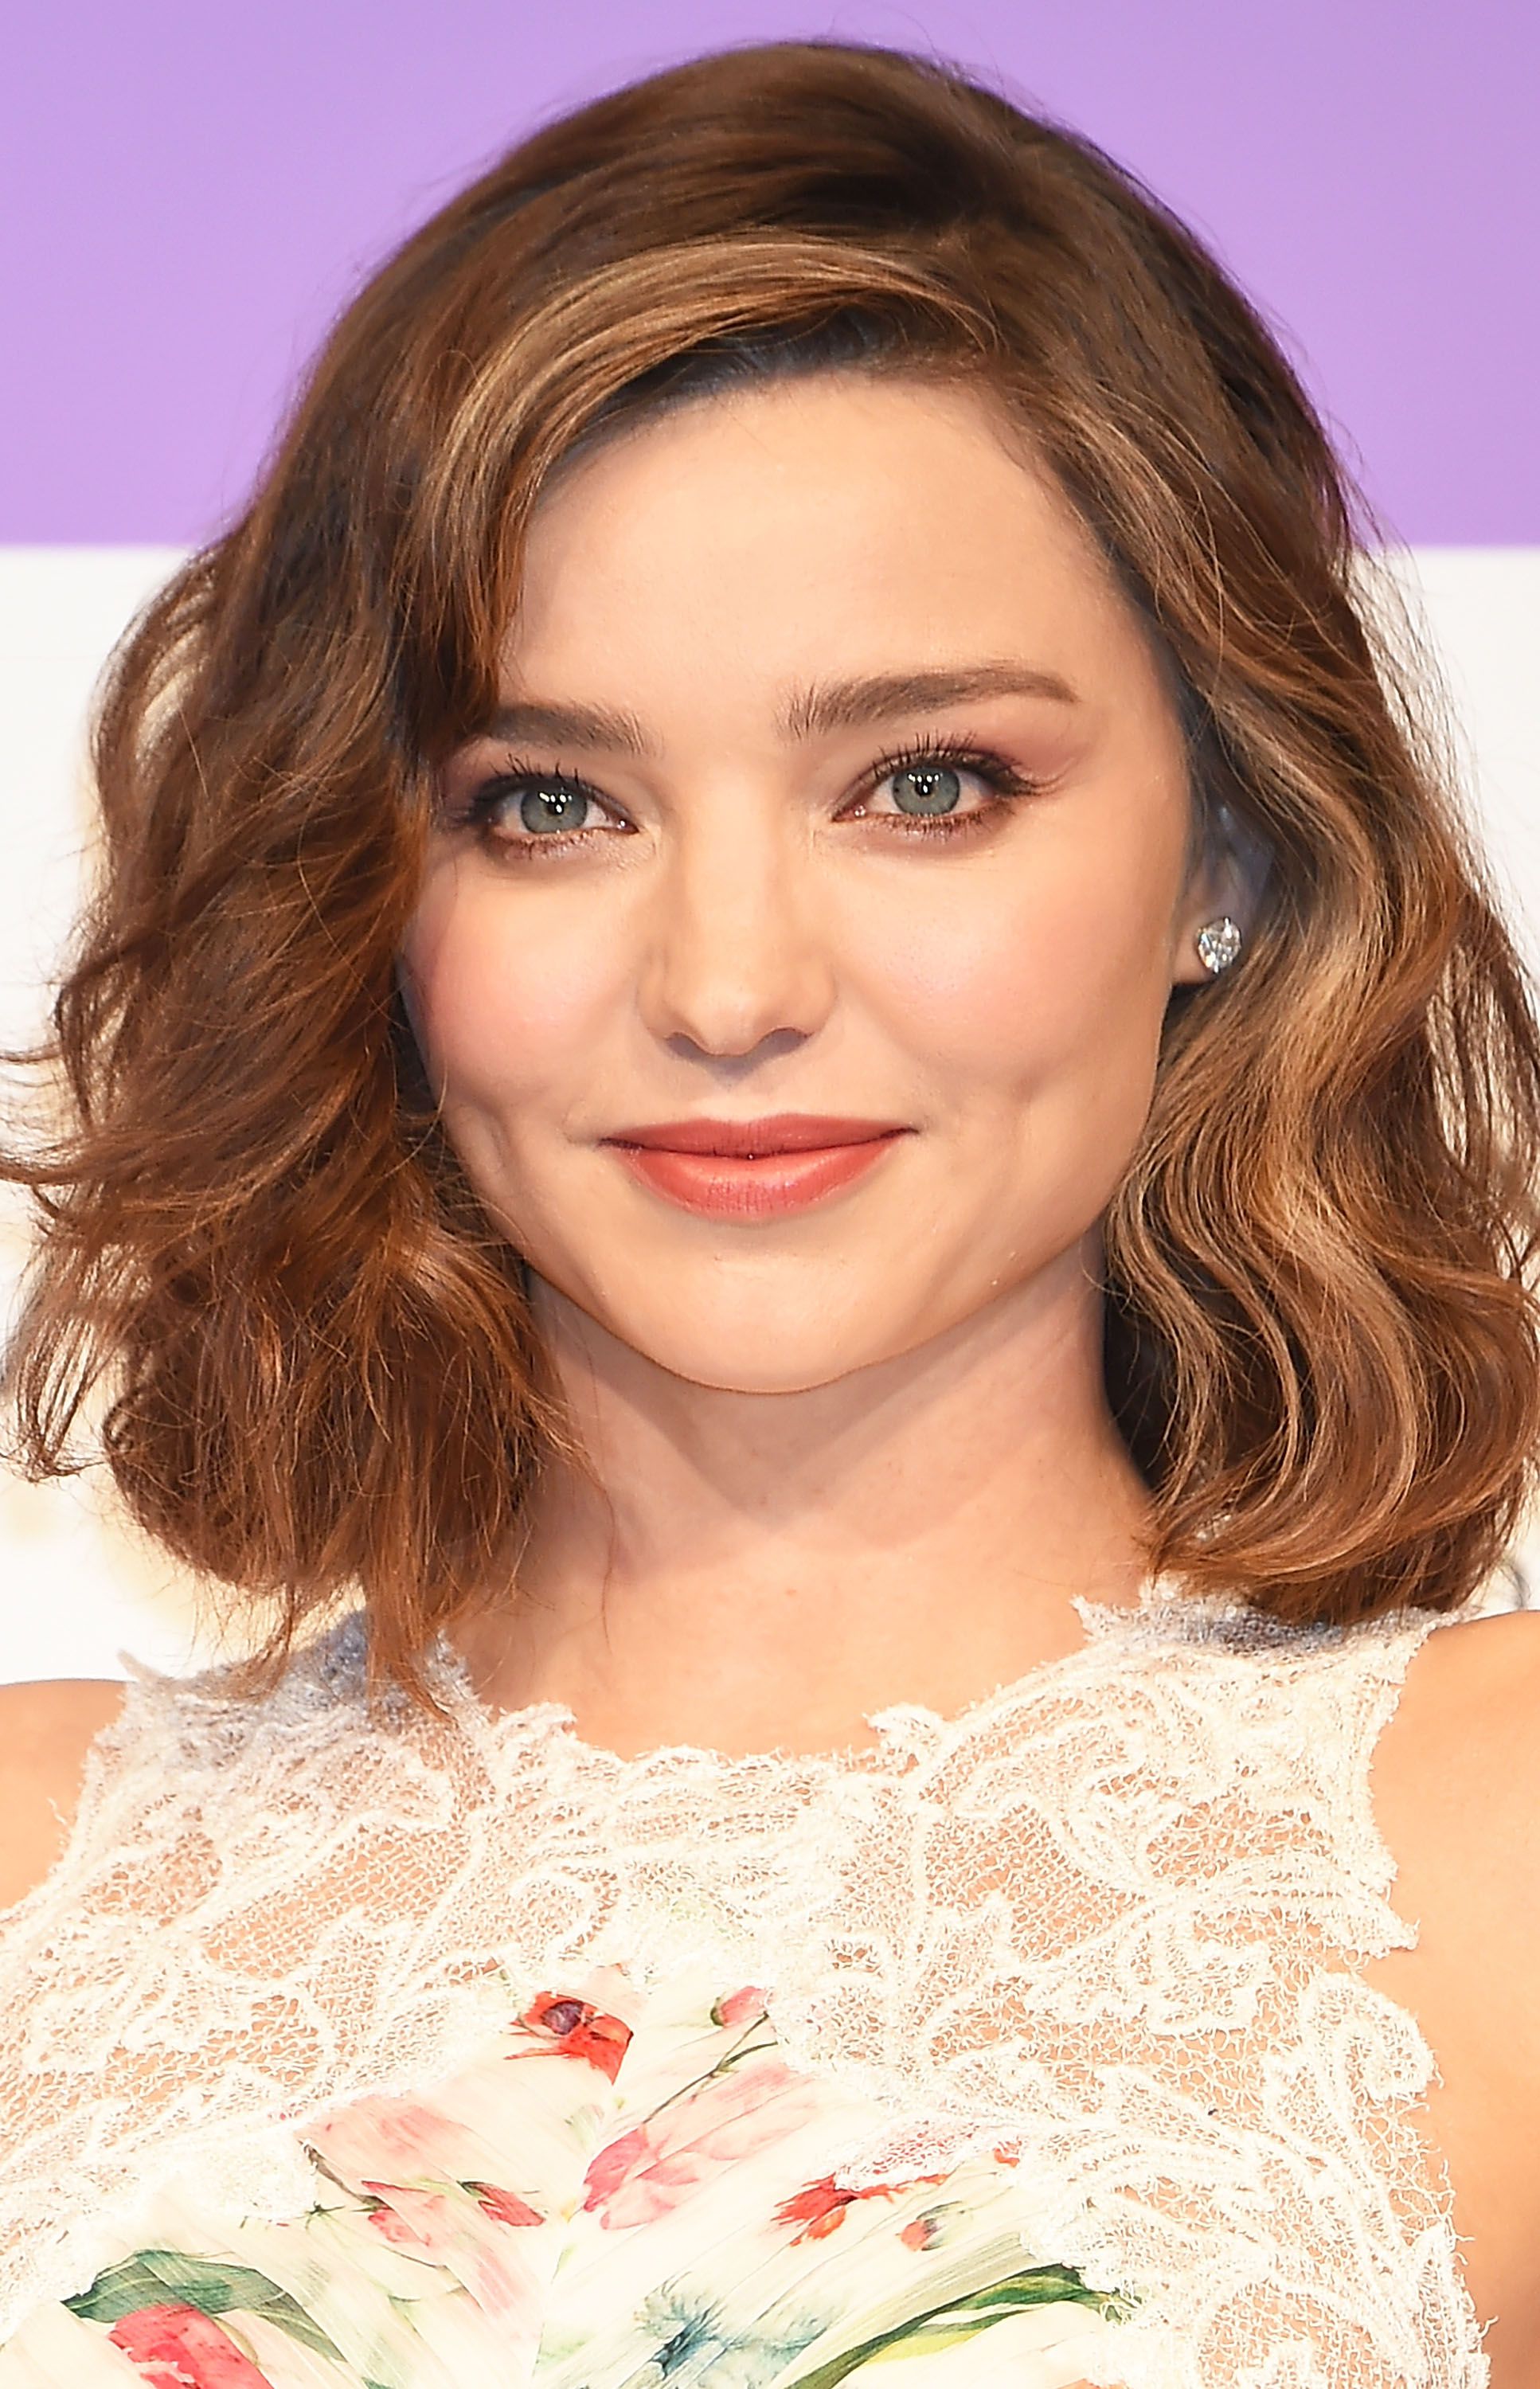 25 Best Hairstyles For Round Faces in 2019 - Easy Haircut Ideas for